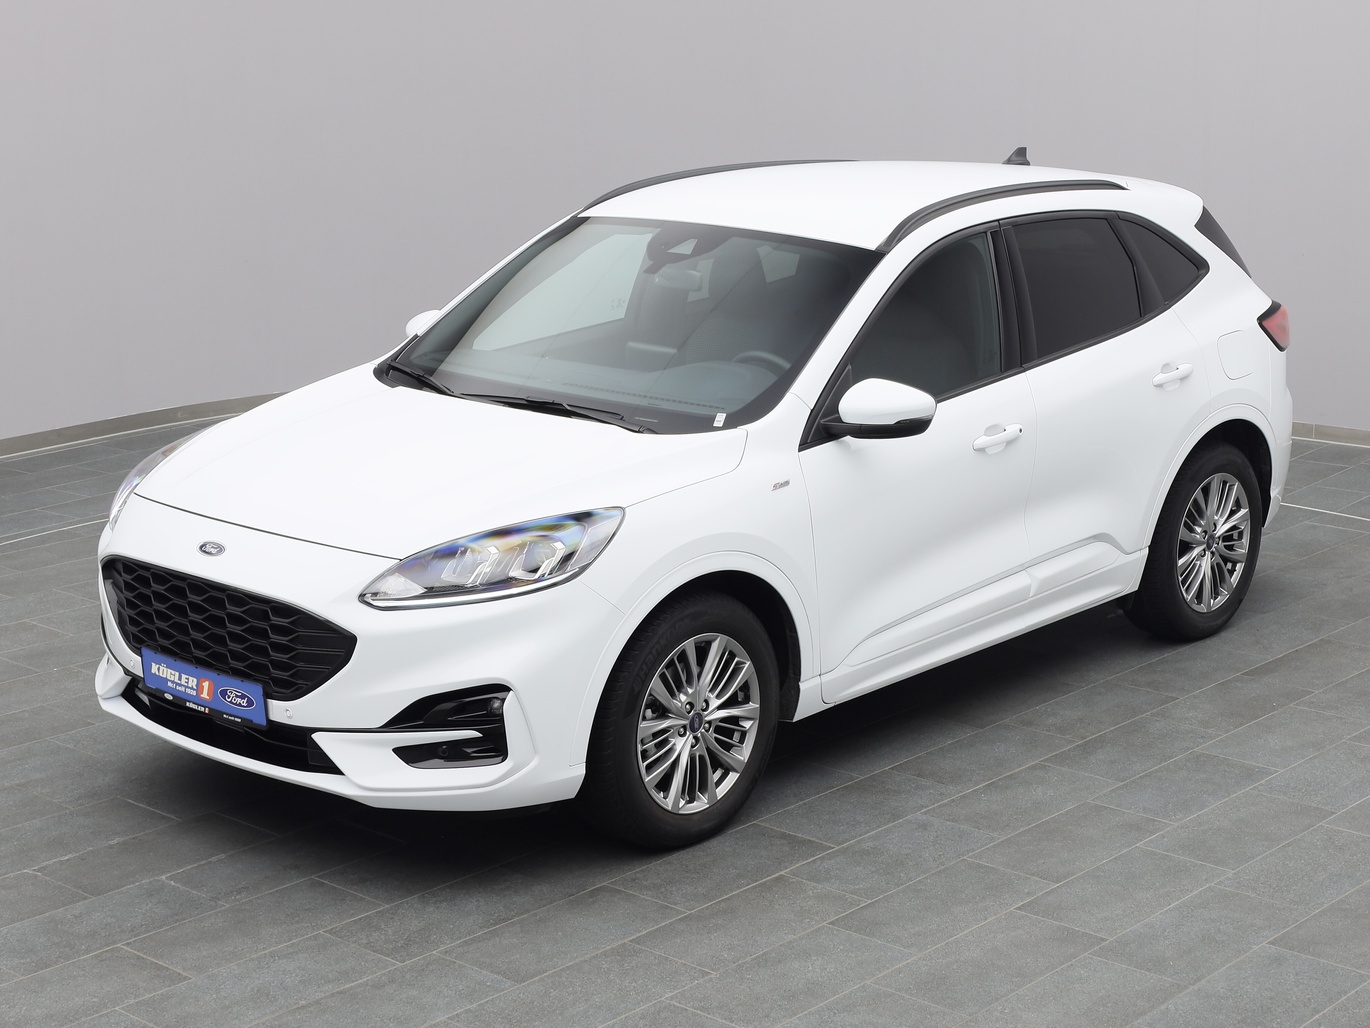  Ford Kuga ST-Line 150PS / Winter-Paket / PDC / Klima in Weiss 